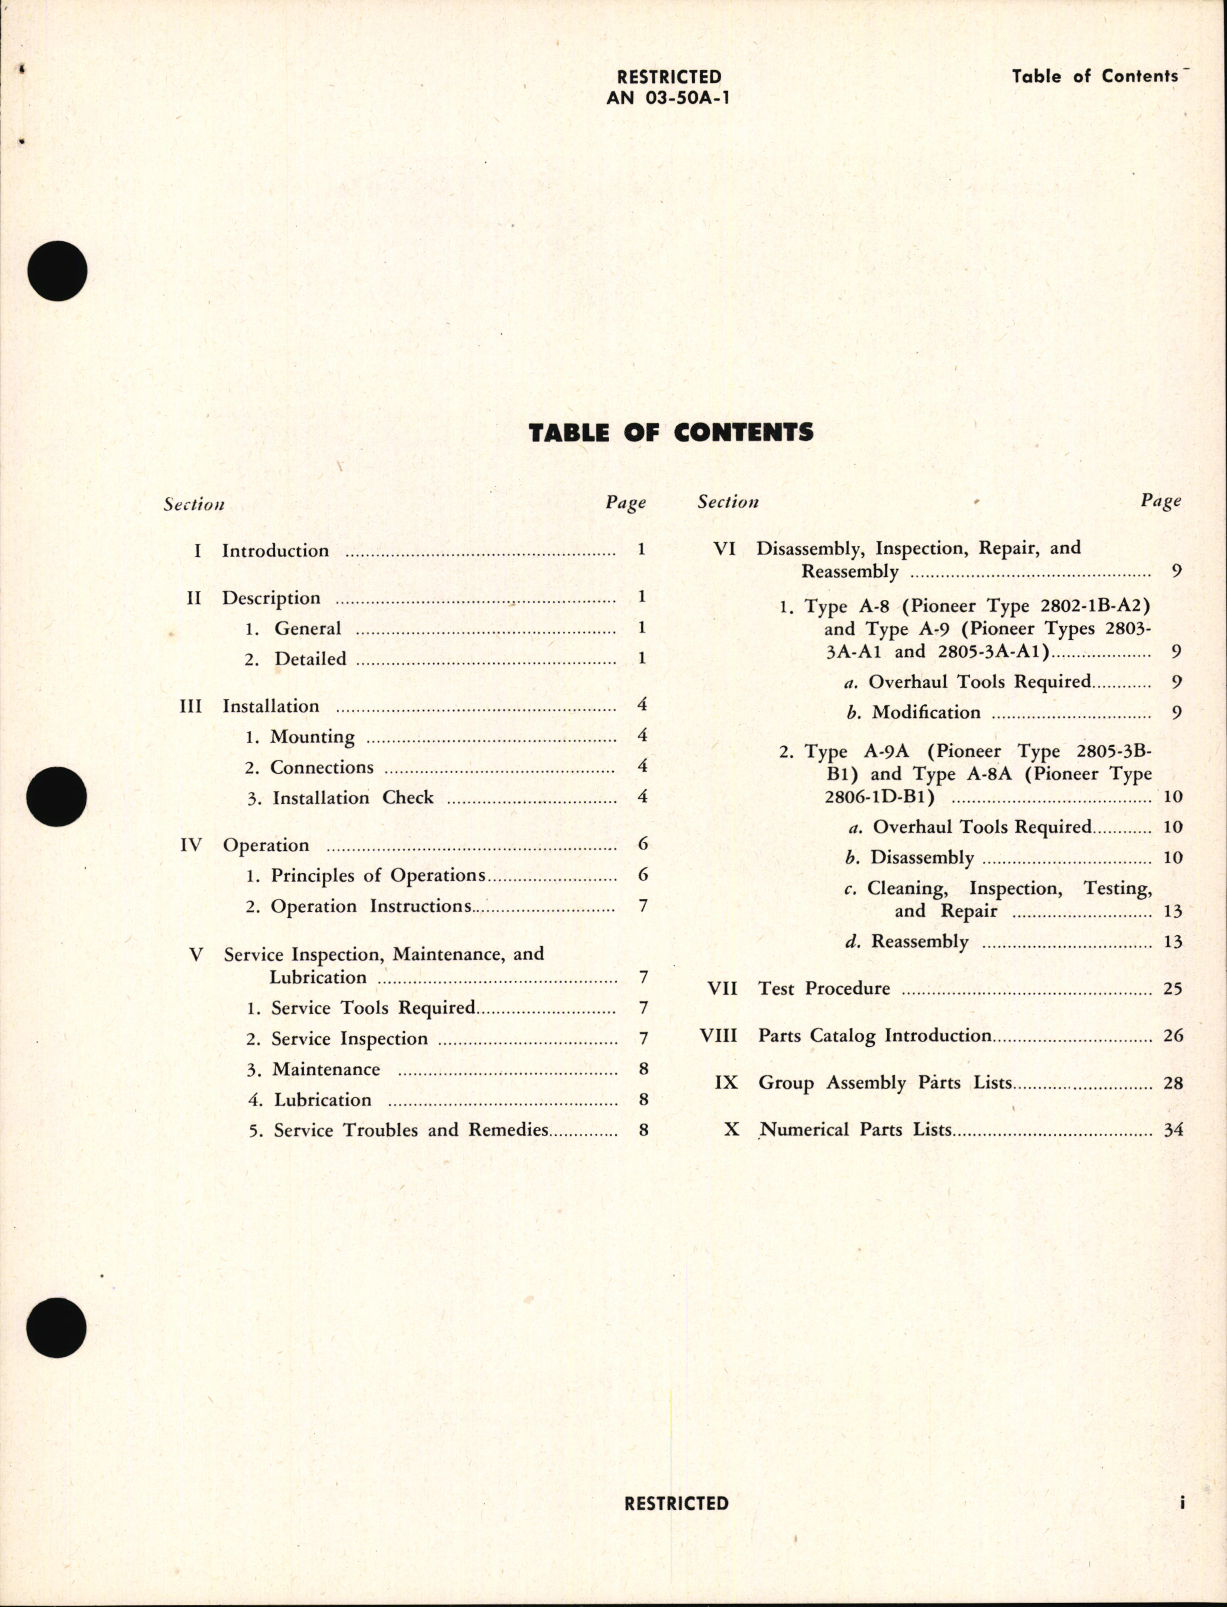 Sample page 3 from AirCorps Library document: Handbook of Instructions with Parts Catalog for Oxygen Regulators